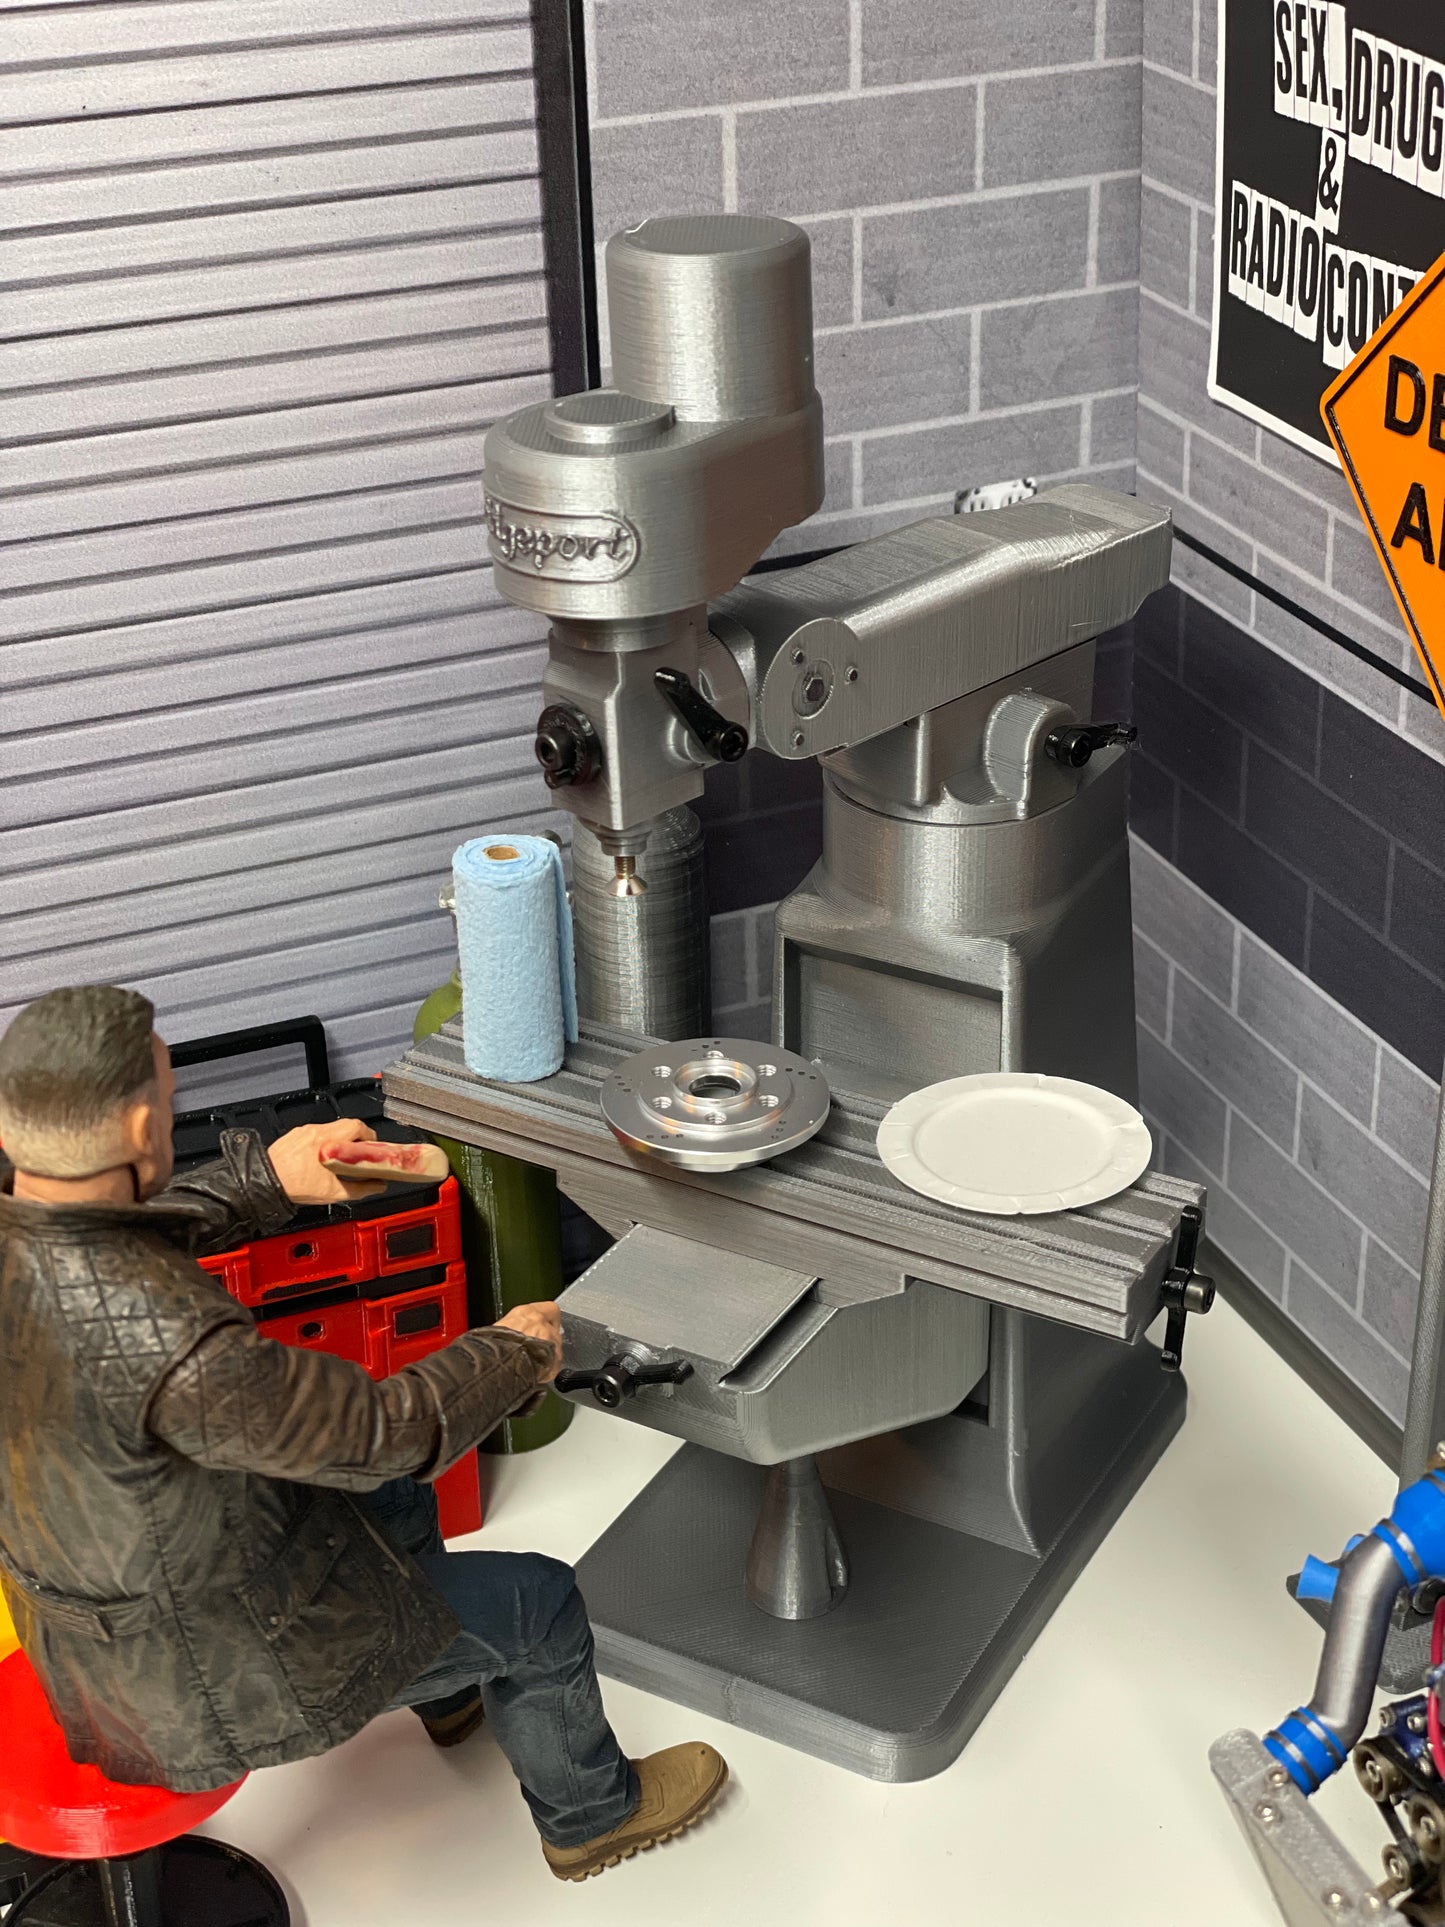 1/10 Scale “Bridgeport” CNC Mill for your Scale Garage